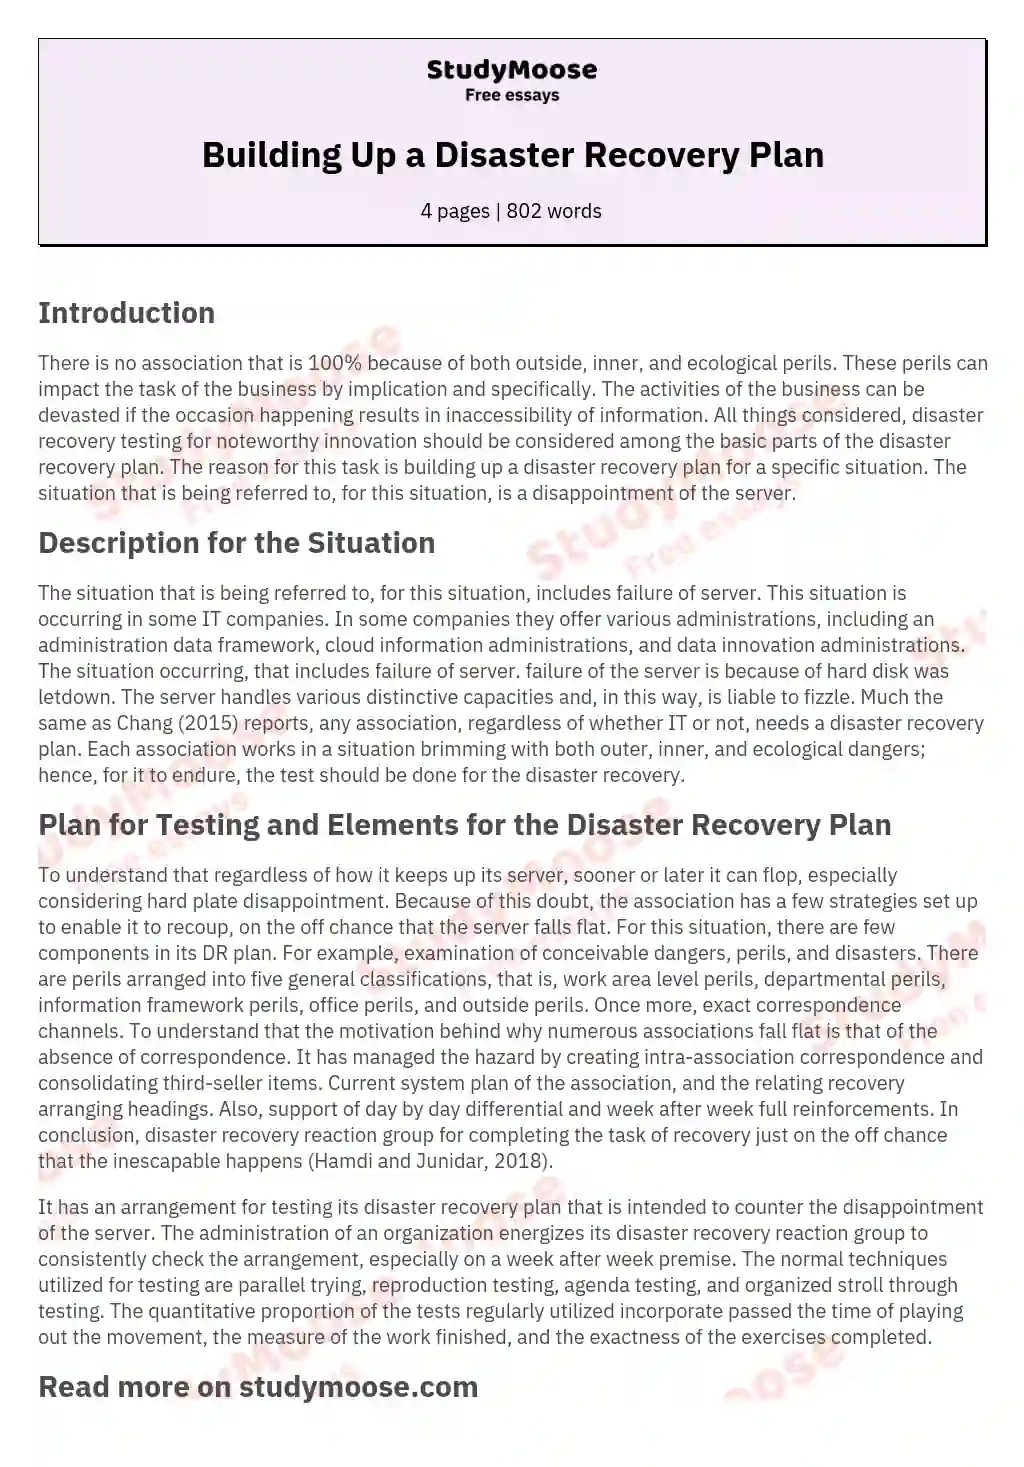 Building Up a Disaster Recovery Plan essay